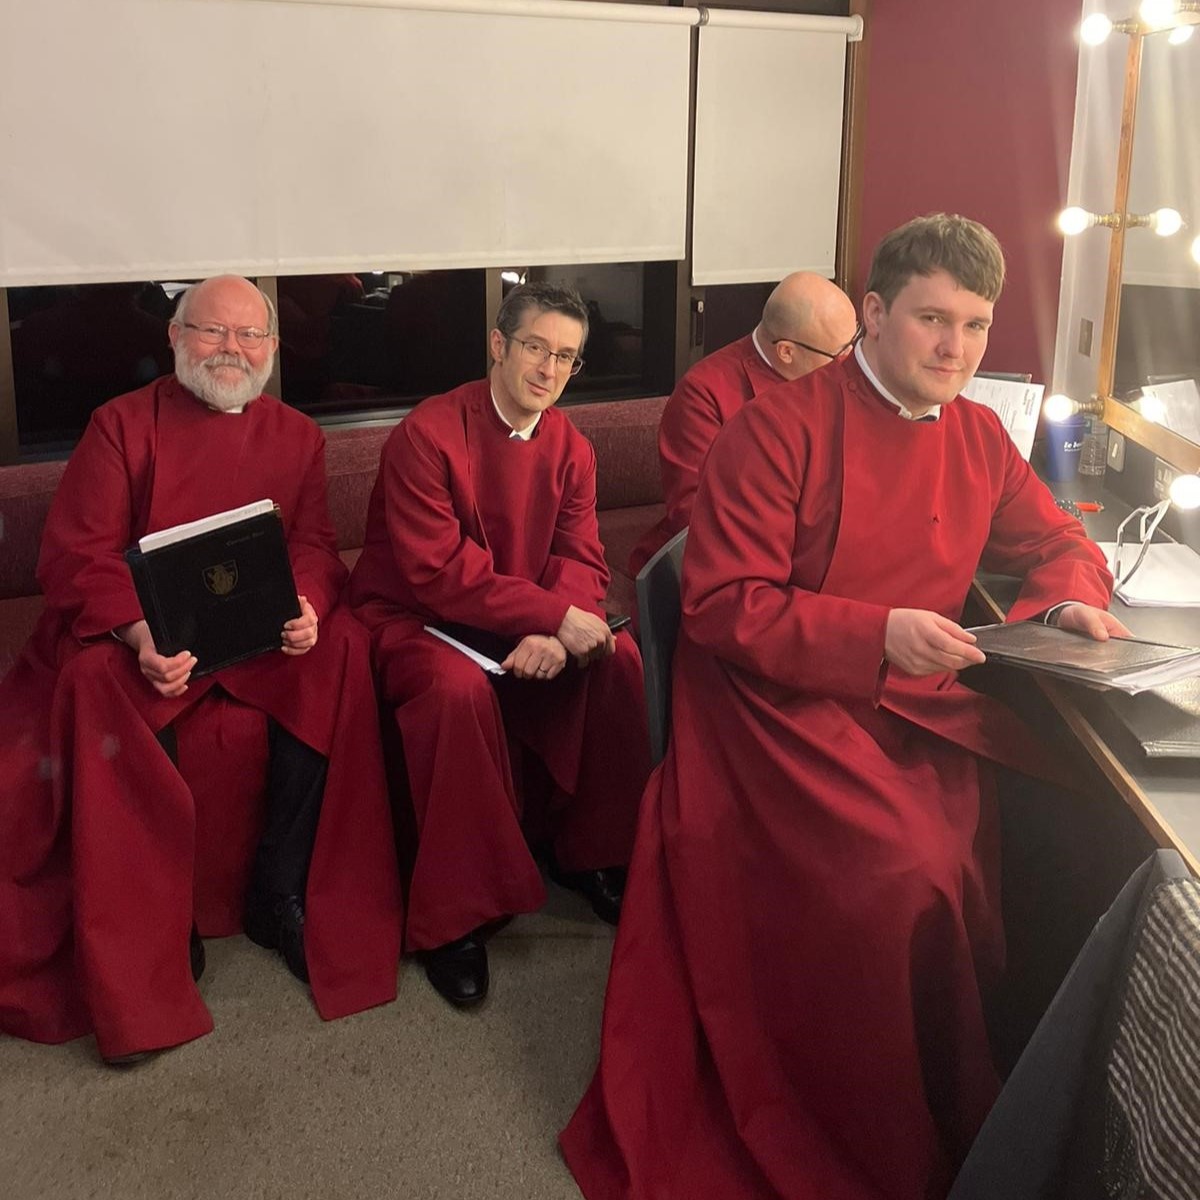 4 lay Vicars prepare for the concert dressed in red cassocks